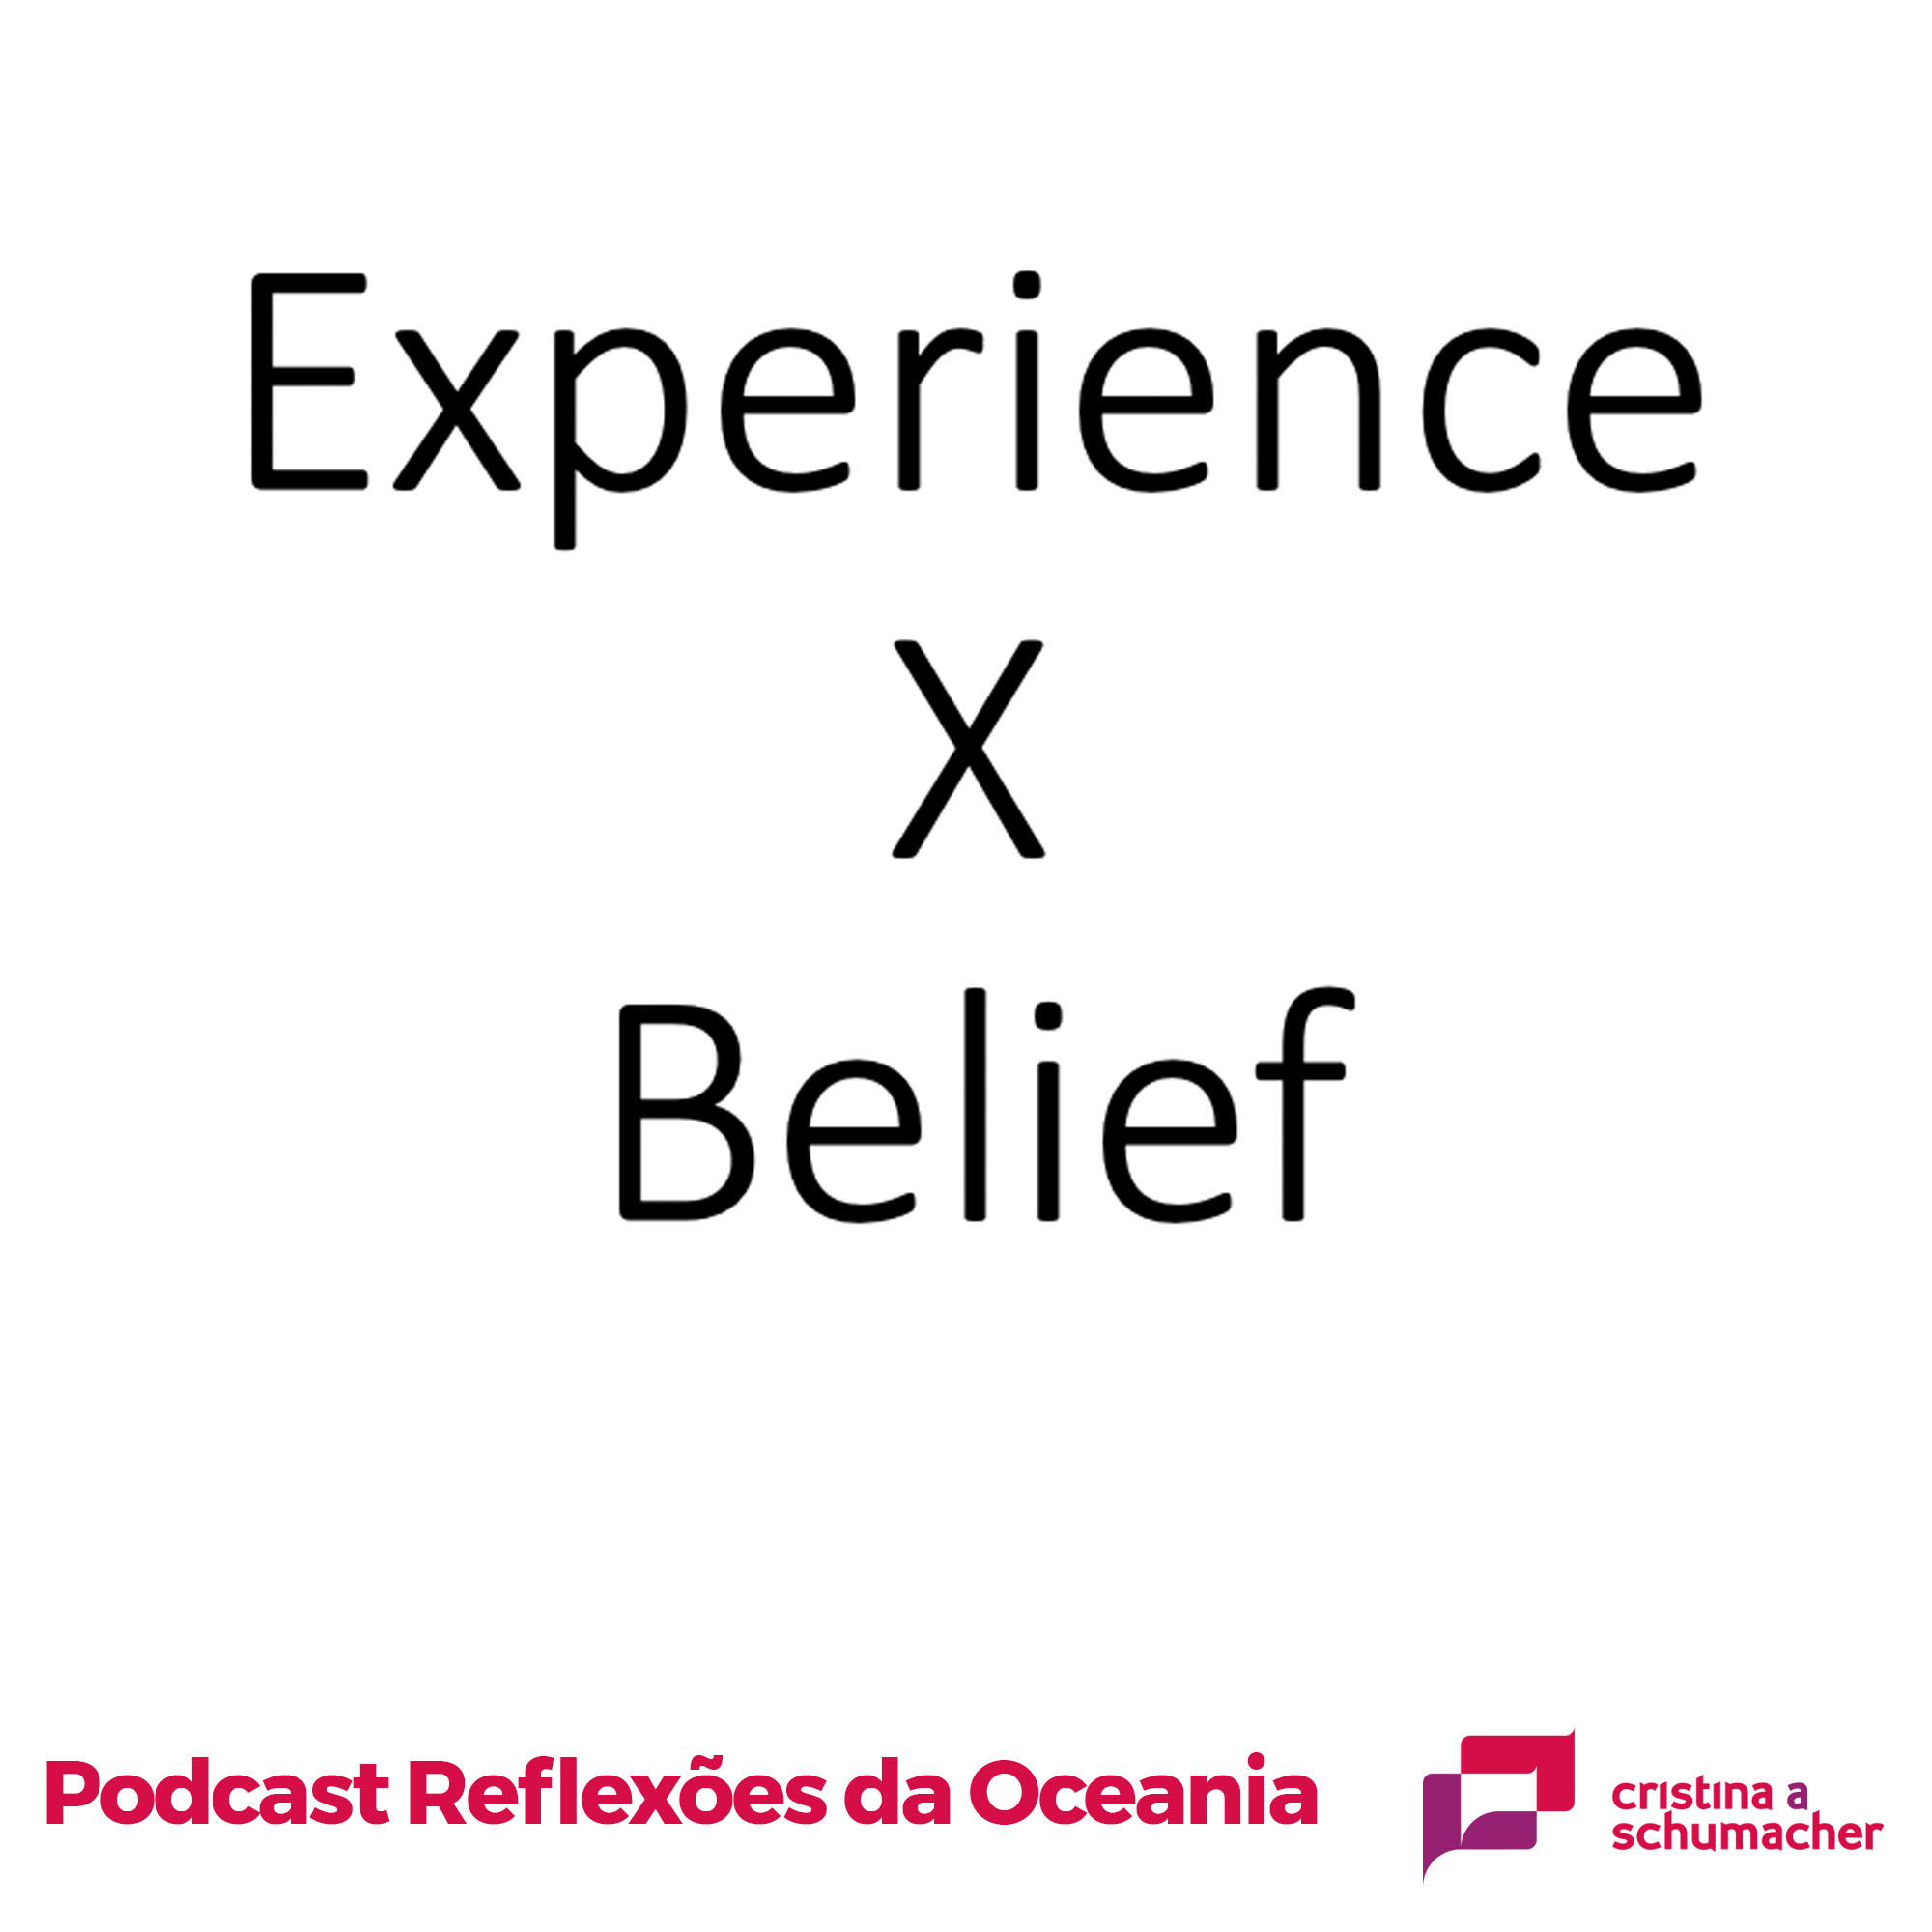 Podcast: Reflexões da Oceania – Words and Their Hidden Values and Broader Meanings